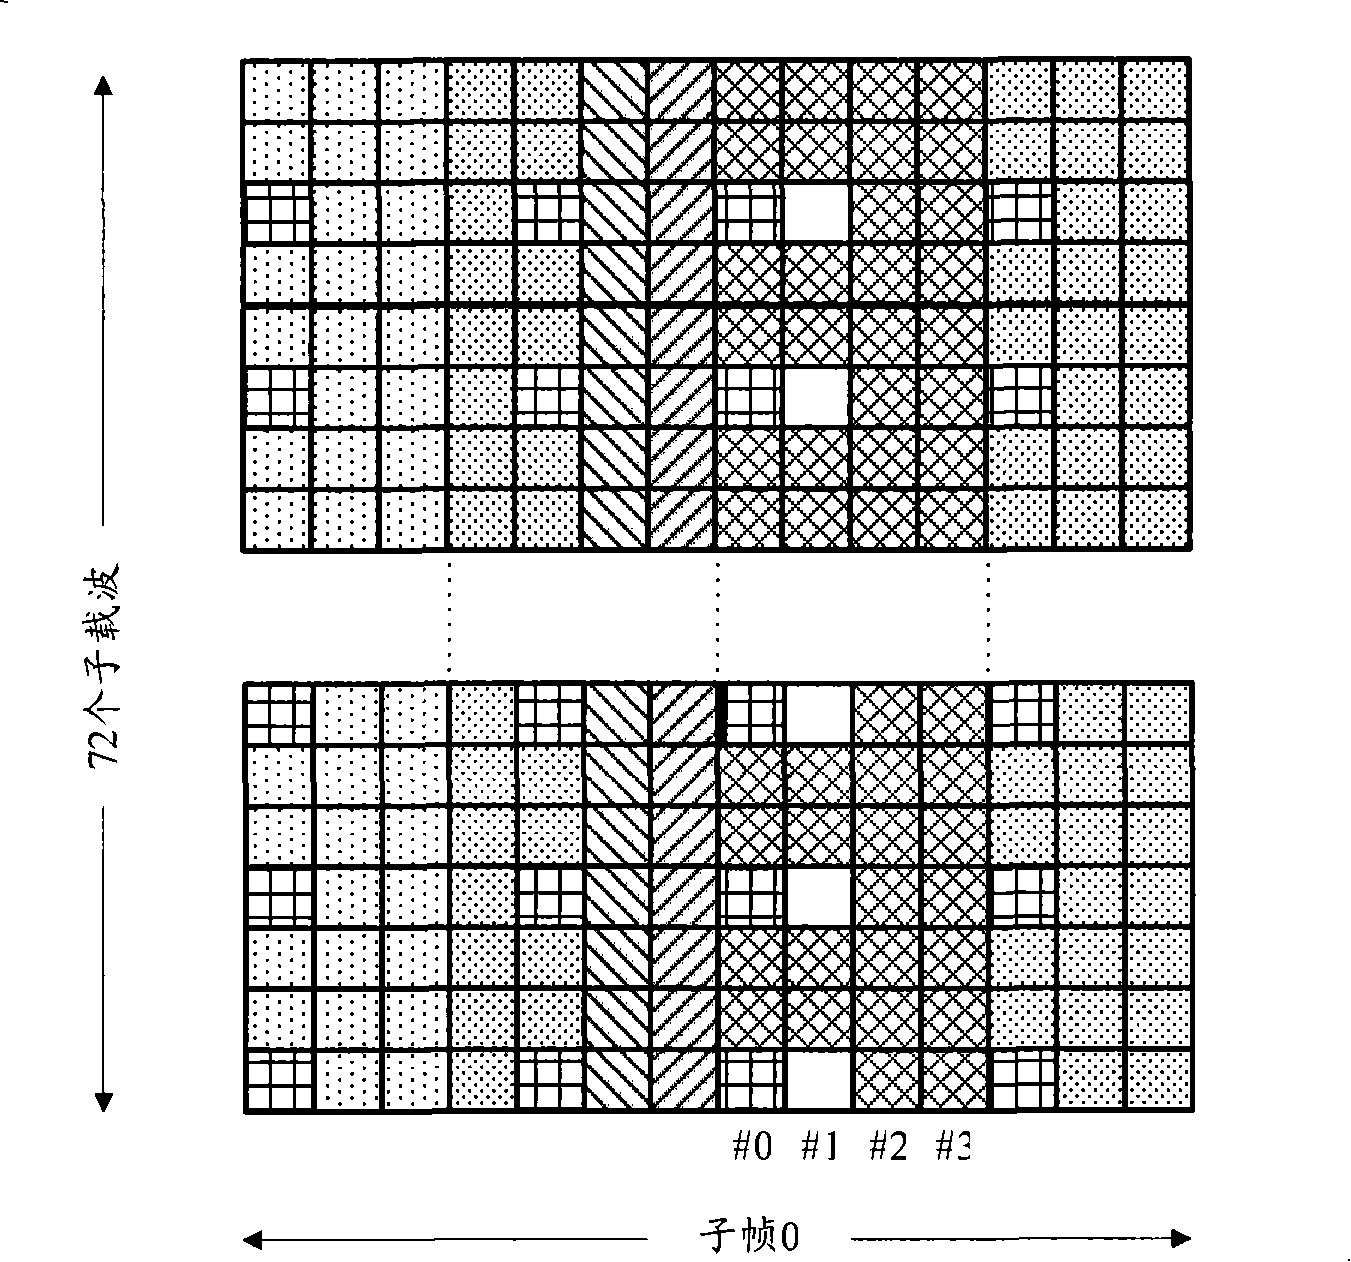 System and method for detecting antenna port configuration information